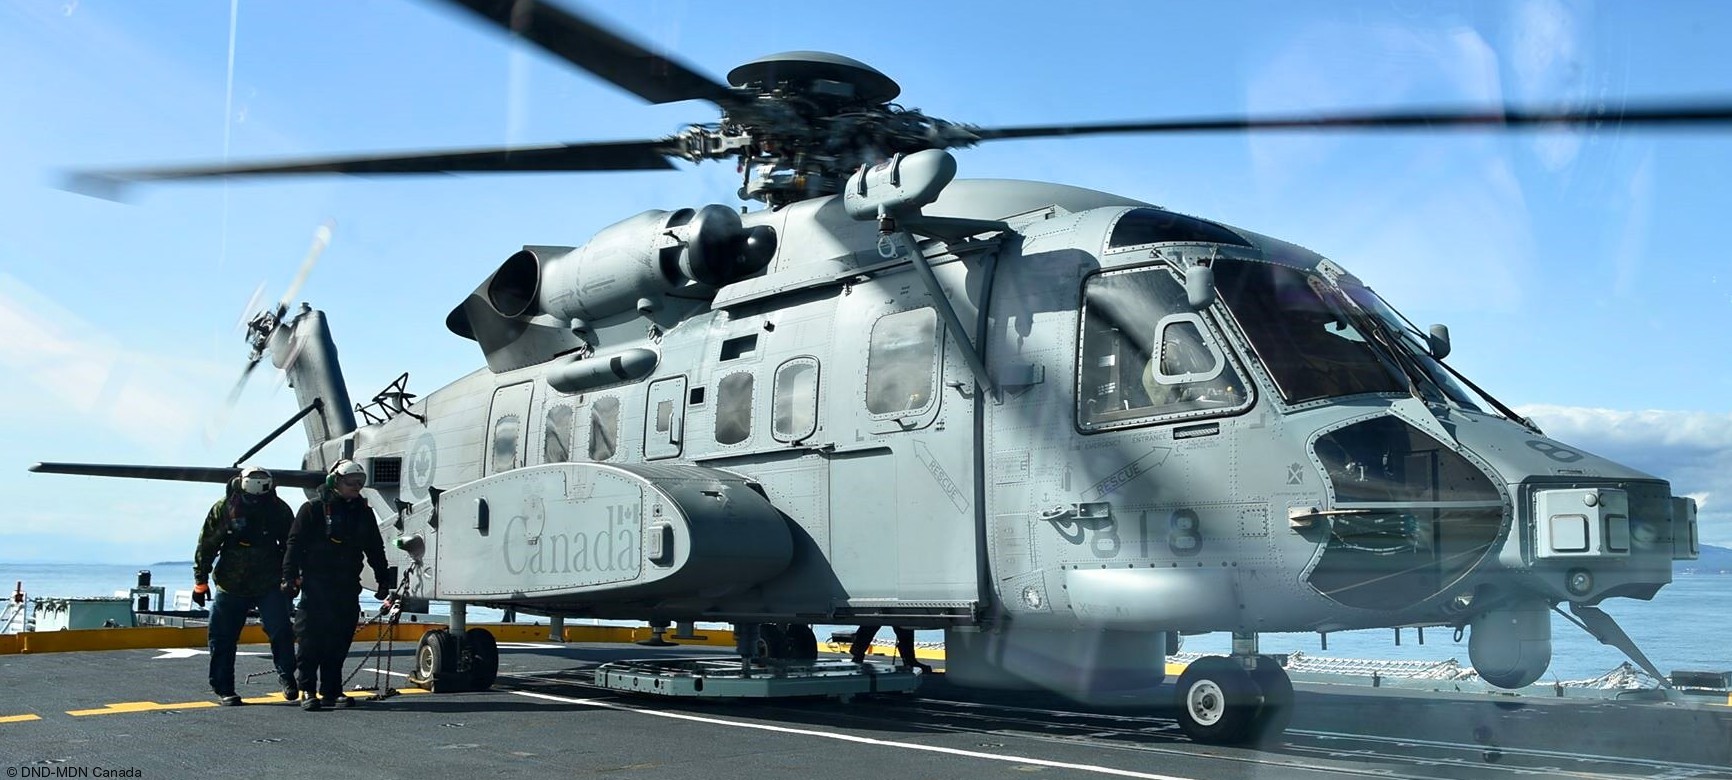 ch-148 cyclone naval helicopter royal canadian air force navy rcaf sikorsky hmcs 406 423 443 maritime squadron 41